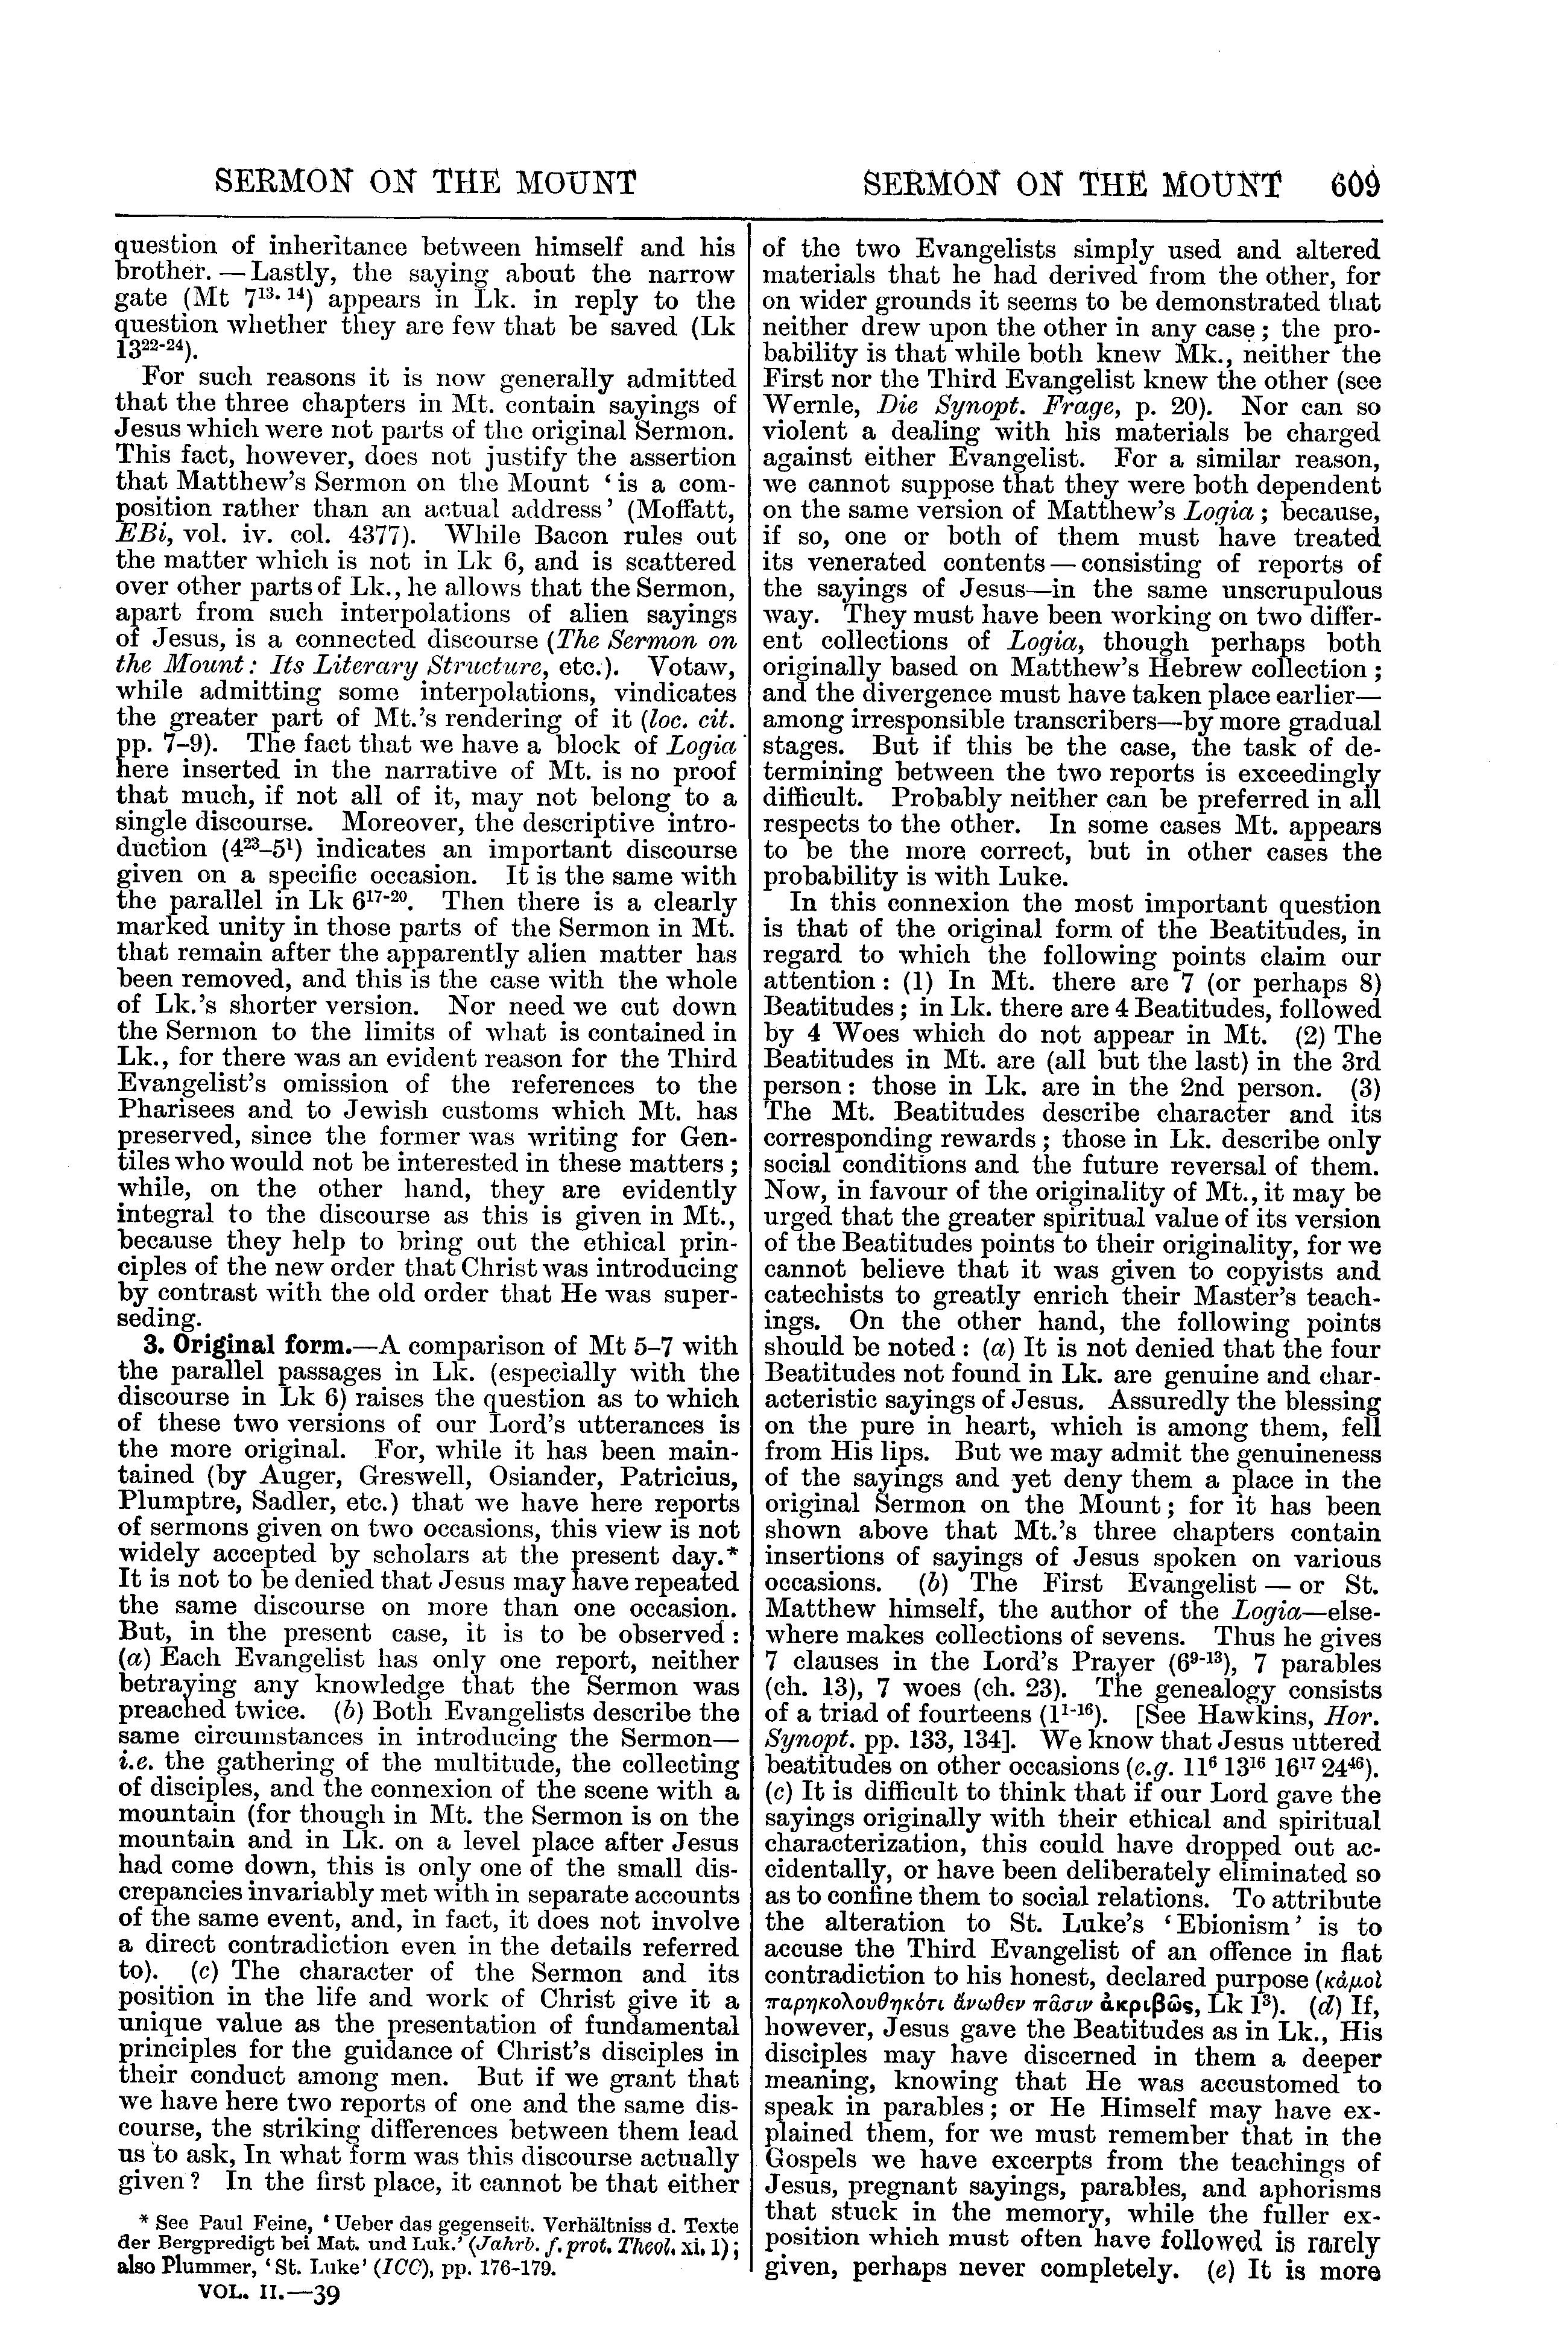 Image of page 609